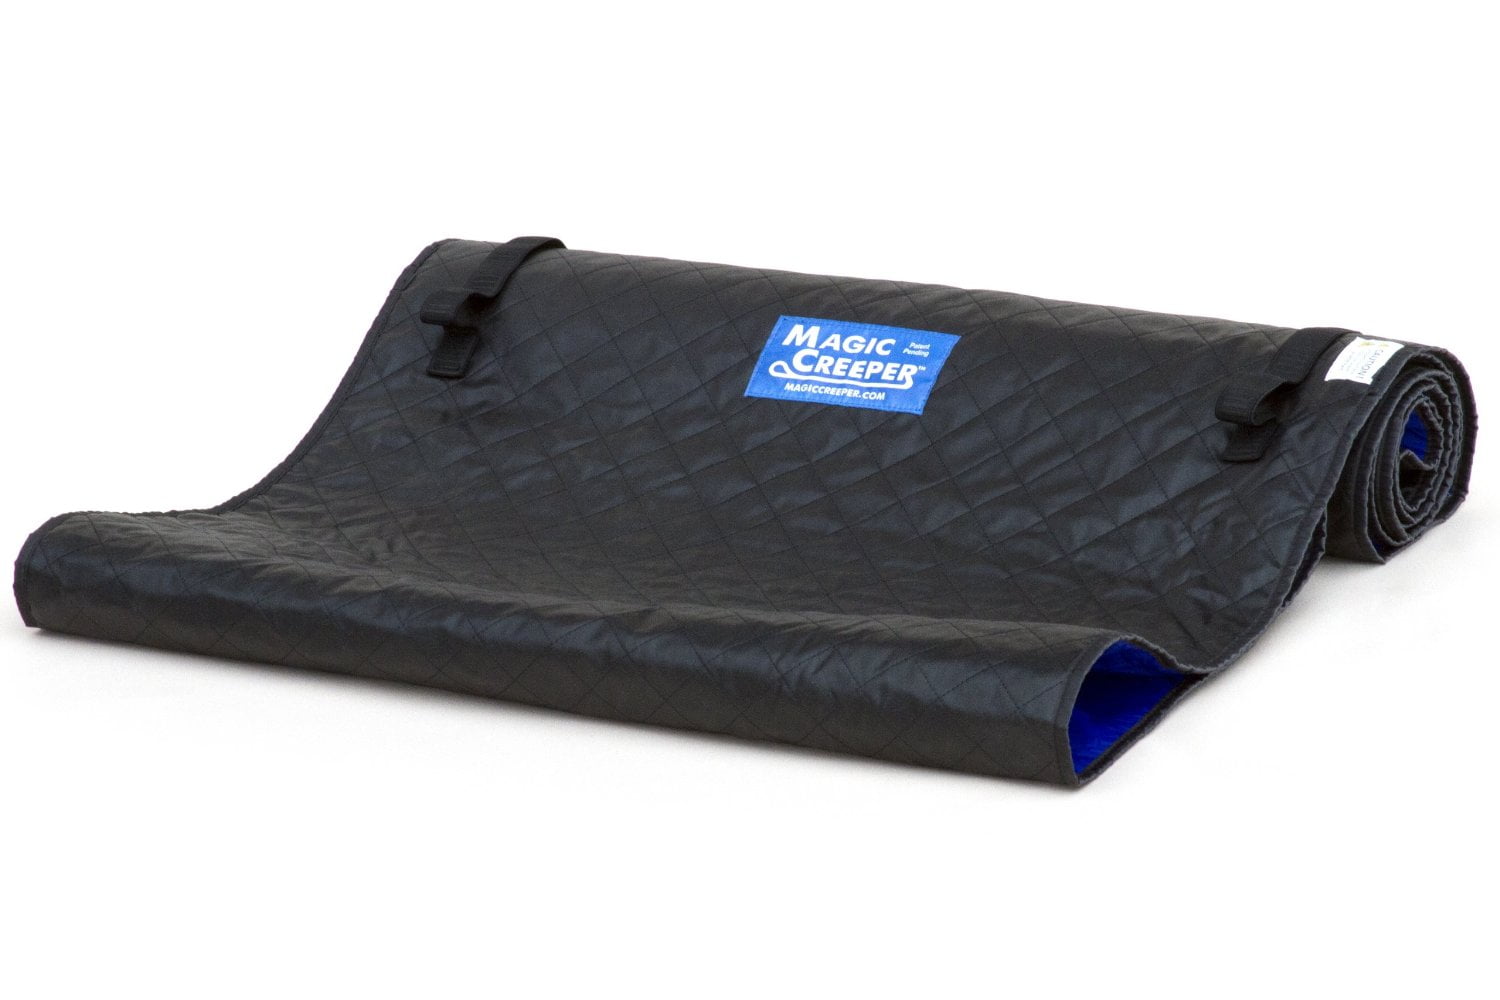 Magic Pad Black Automotive Creeper Rolling Pad For Working On The Ground Tool